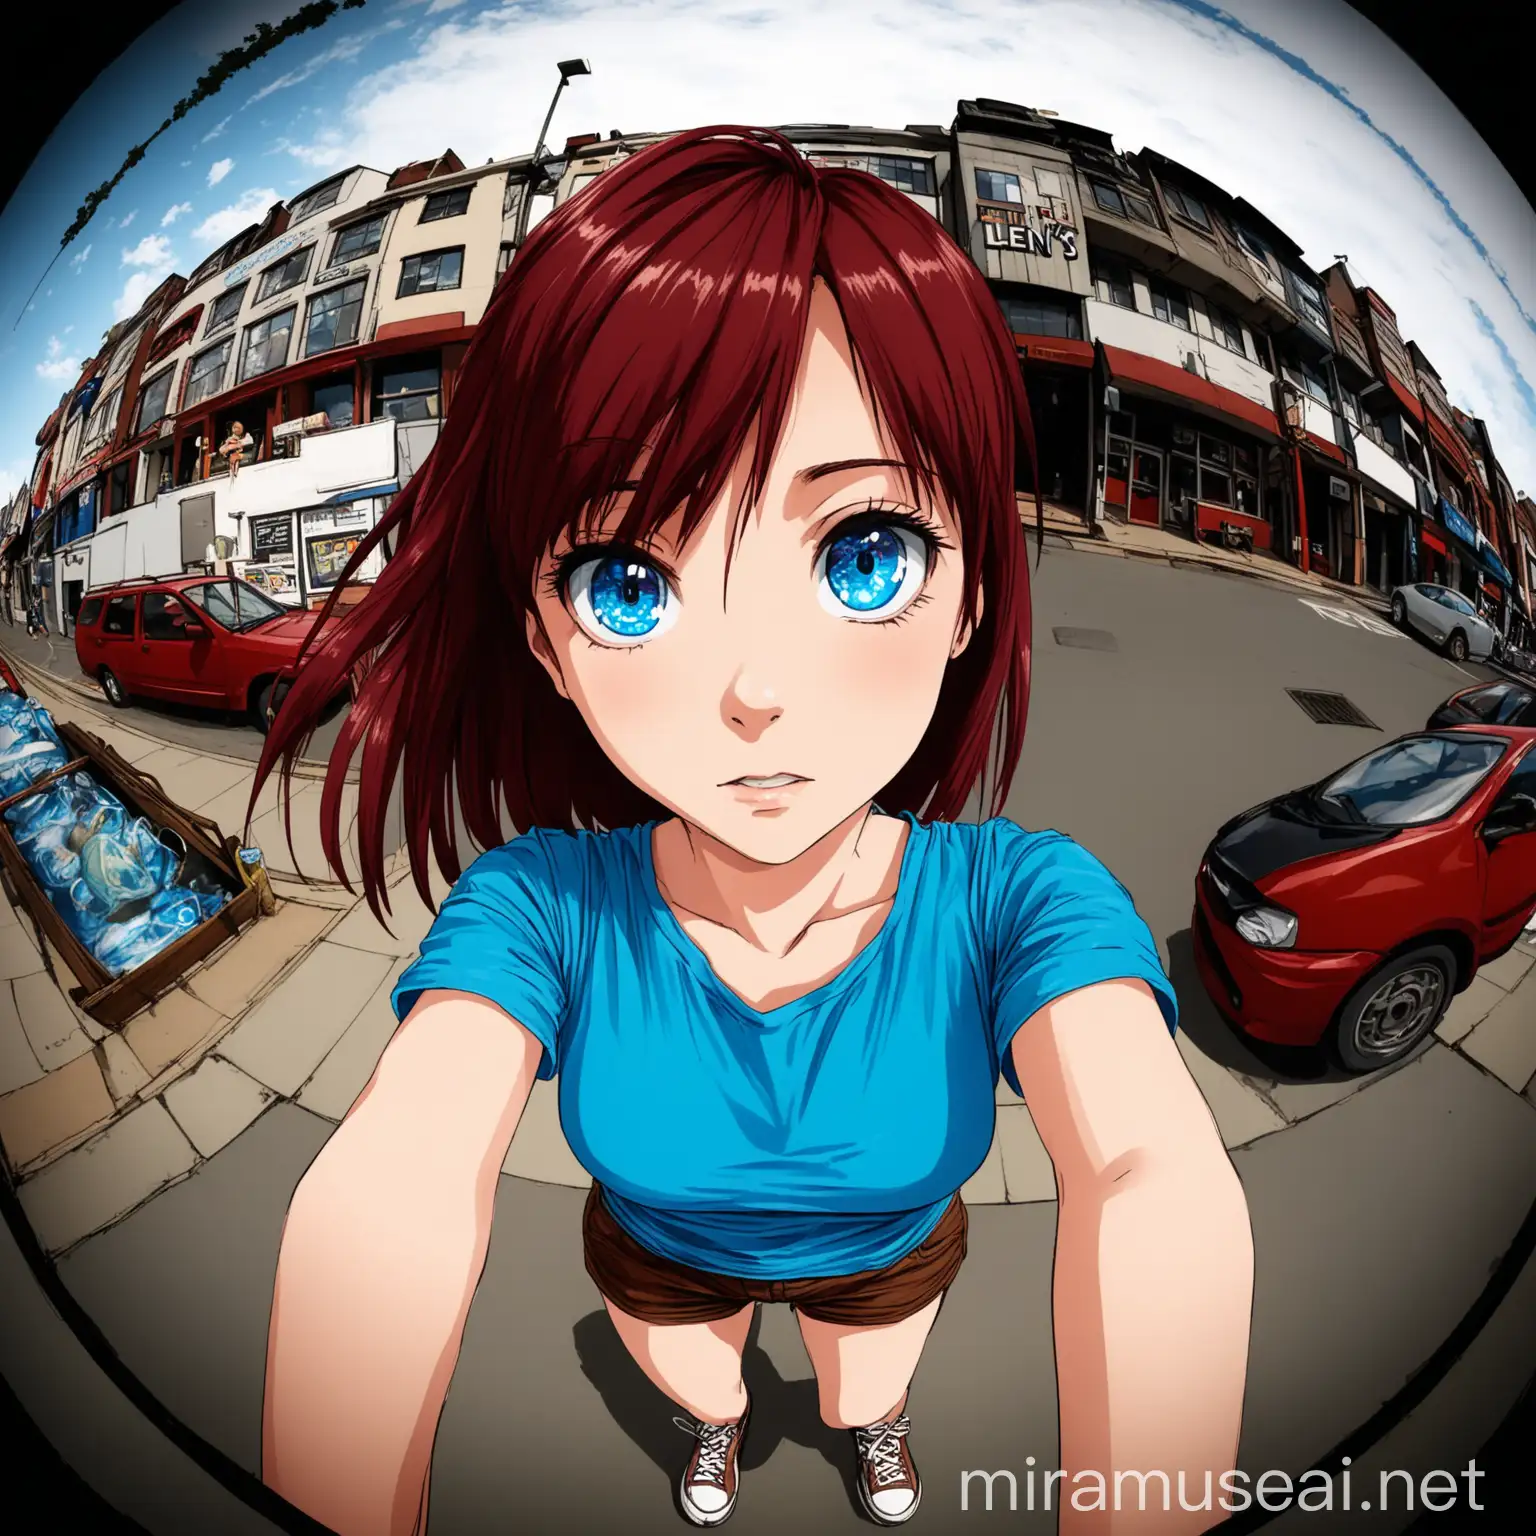  a girl with dark red hair and blue eyes. She as Blue t shirt and brown shorts.
Fish eye Len's of view